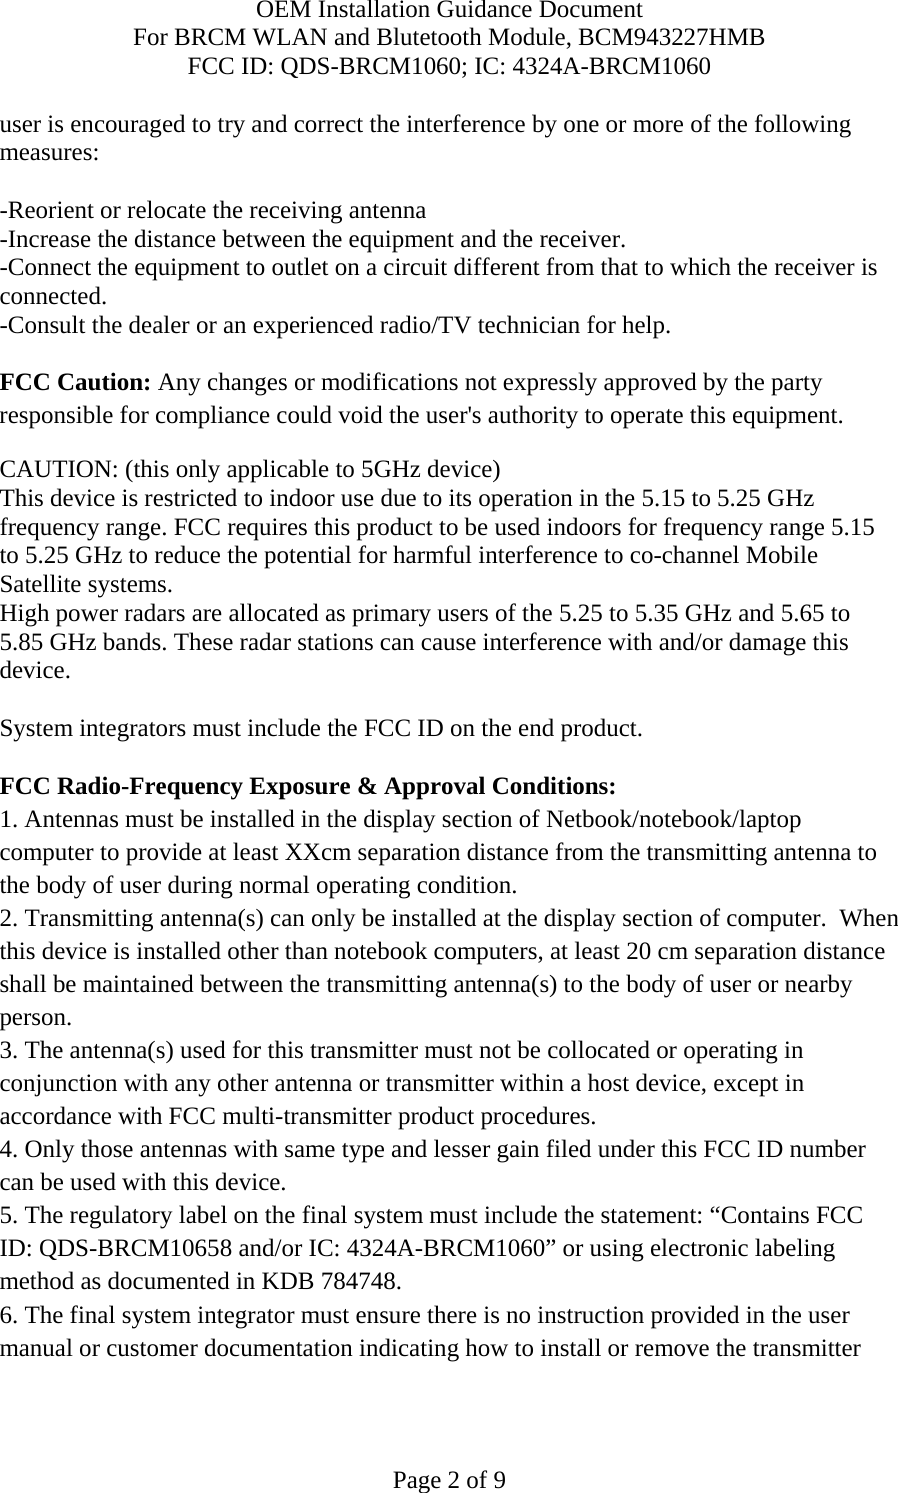 OEM Installation Guidance Document For BRCM WLAN and Blutetooth Module, BCM943227HMB FCC ID: QDS-BRCM1060; IC: 4324A-BRCM1060  Page 2 of 9 user is encouraged to try and correct the interference by one or more of the following measures:   -Reorient or relocate the receiving antenna -Increase the distance between the equipment and the receiver. -Connect the equipment to outlet on a circuit different from that to which the receiver is connected. -Consult the dealer or an experienced radio/TV technician for help.  FCC Caution: Any changes or modifications not expressly approved by the party responsible for compliance could void the user&apos;s authority to operate this equipment. CAUTION: (this only applicable to 5GHz device) This device is restricted to indoor use due to its operation in the 5.15 to 5.25 GHz frequency range. FCC requires this product to be used indoors for frequency range 5.15 to 5.25 GHz to reduce the potential for harmful interference to co-channel Mobile Satellite systems. High power radars are allocated as primary users of the 5.25 to 5.35 GHz and 5.65 to 5.85 GHz bands. These radar stations can cause interference with and/or damage this device.  System integrators must include the FCC ID on the end product.   FCC Radio-Frequency Exposure &amp; Approval Conditions: 1. Antennas must be installed in the display section of Netbook/notebook/laptop computer to provide at least XXcm separation distance from the transmitting antenna to the body of user during normal operating condition. 2. Transmitting antenna(s) can only be installed at the display section of computer.  When this device is installed other than notebook computers, at least 20 cm separation distance shall be maintained between the transmitting antenna(s) to the body of user or nearby person. 3. The antenna(s) used for this transmitter must not be collocated or operating in conjunction with any other antenna or transmitter within a host device, except in accordance with FCC multi-transmitter product procedures. 4. Only those antennas with same type and lesser gain filed under this FCC ID number can be used with this device. 5. The regulatory label on the final system must include the statement: “Contains FCC ID: QDS-BRCM10658 and/or IC: 4324A-BRCM1060” or using electronic labeling method as documented in KDB 784748. 6. The final system integrator must ensure there is no instruction provided in the user manual or customer documentation indicating how to install or remove the transmitter 